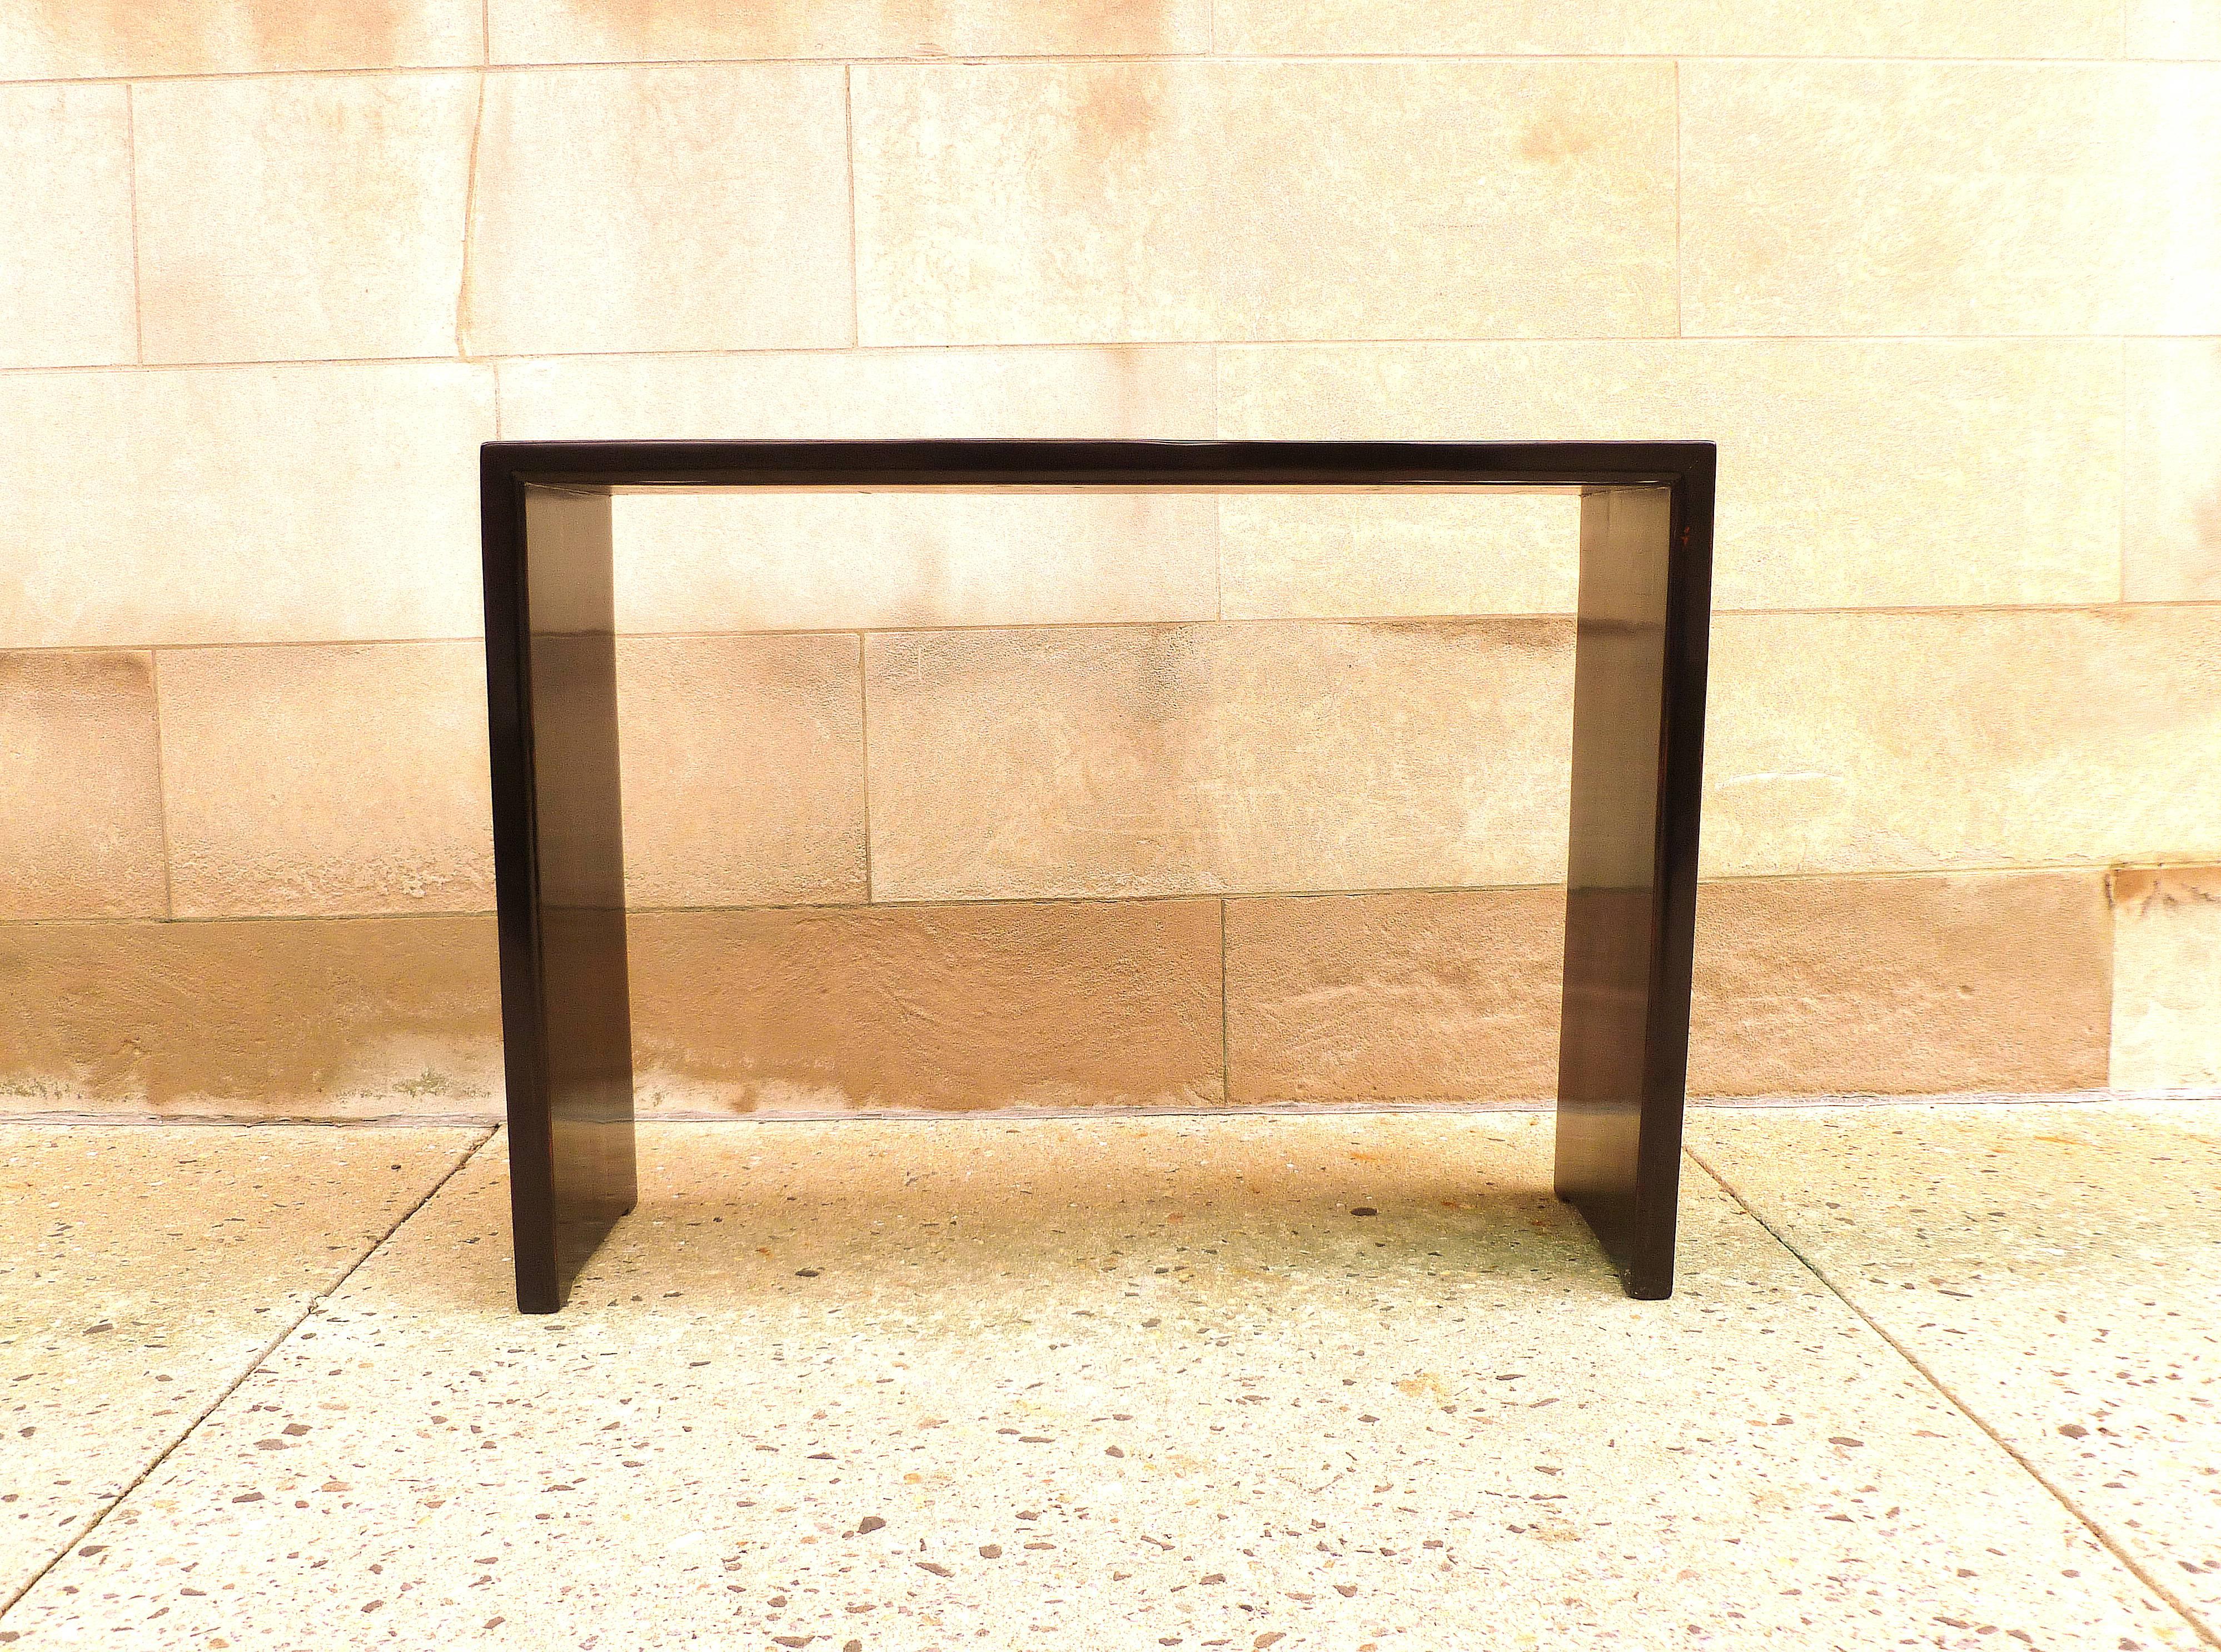 Fine black lacquer console table with waterfall legs. Simple and elegant form, beautiful color and lines.